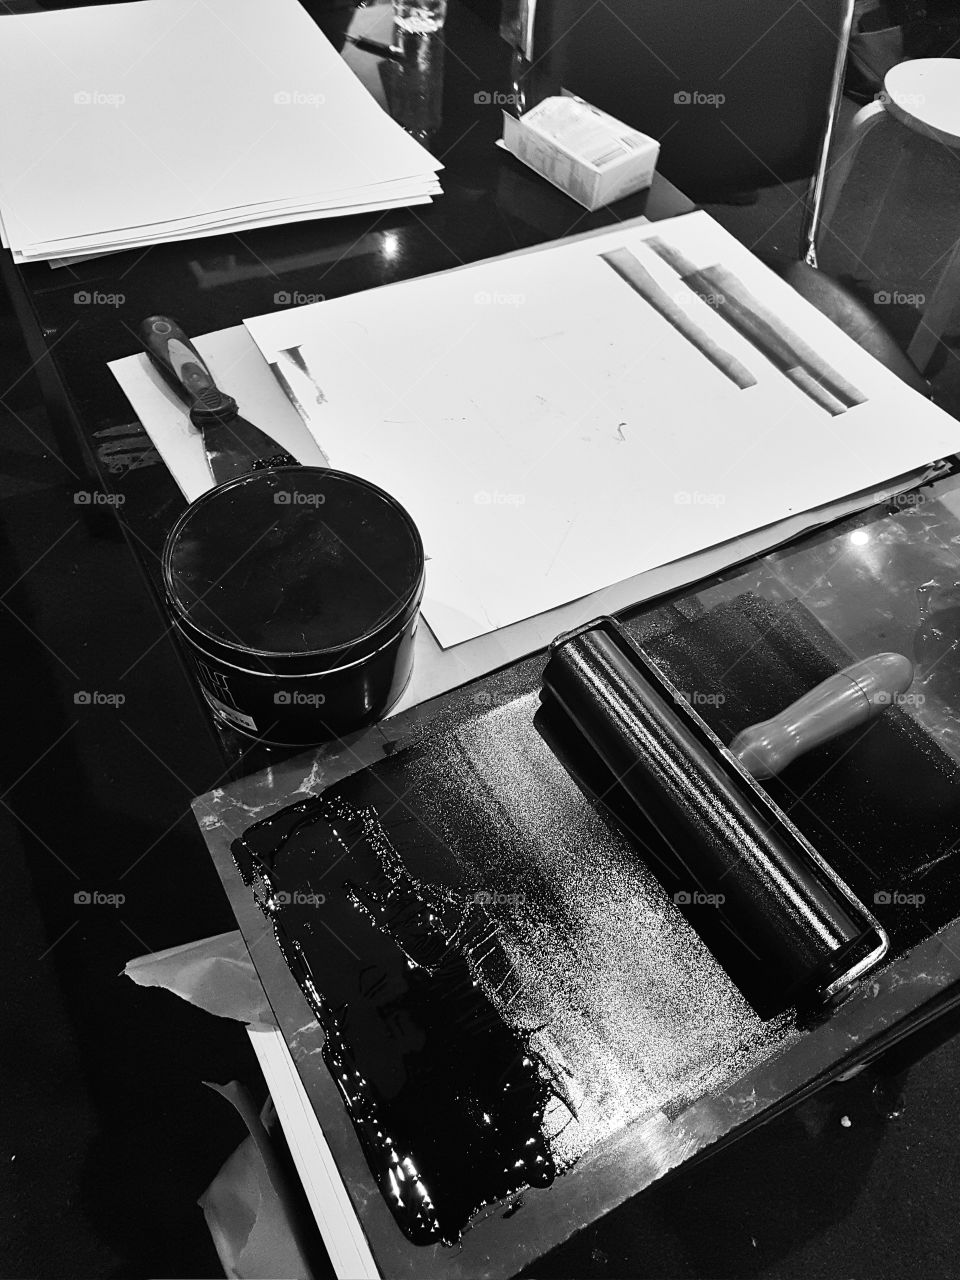 artists tools black paint blank white paper at workshop